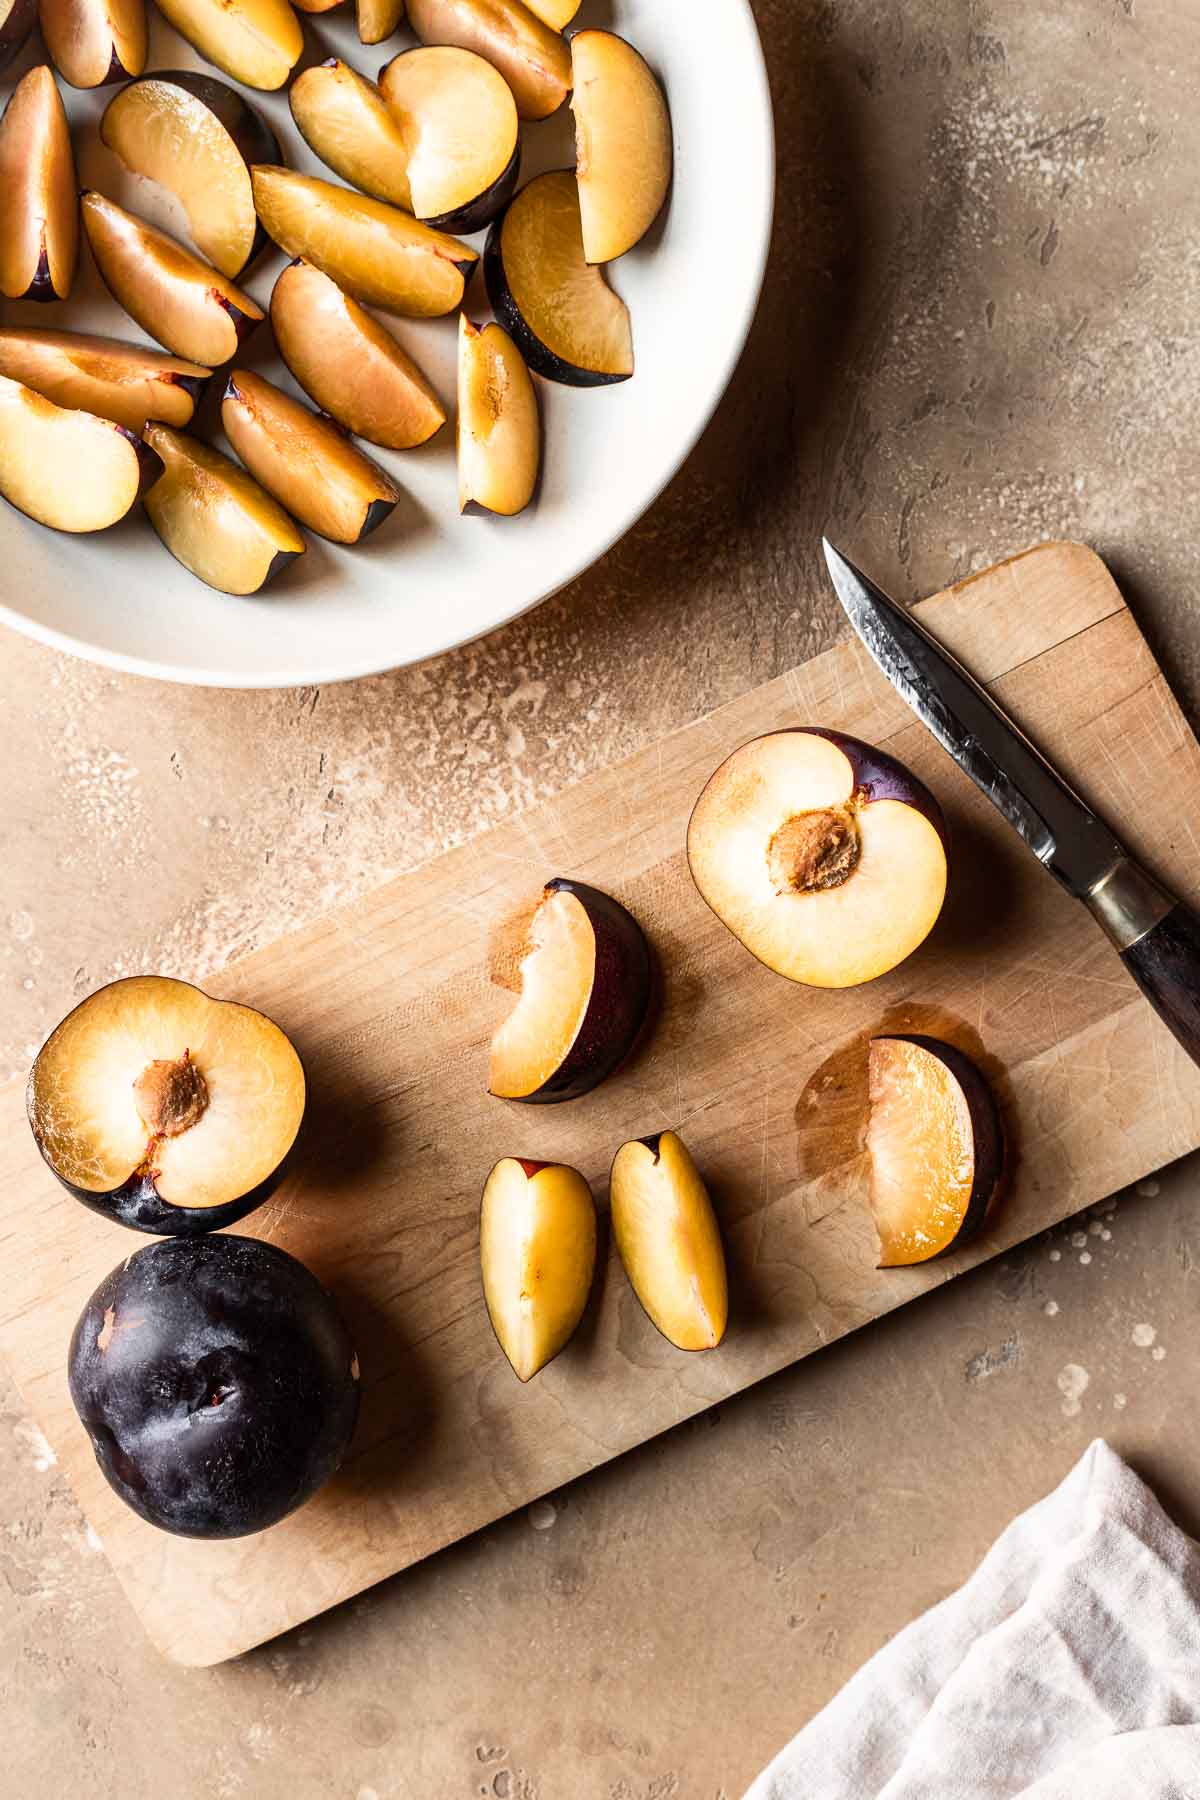 Sliced plums on a wooden cutting board with more on a plate nearby.